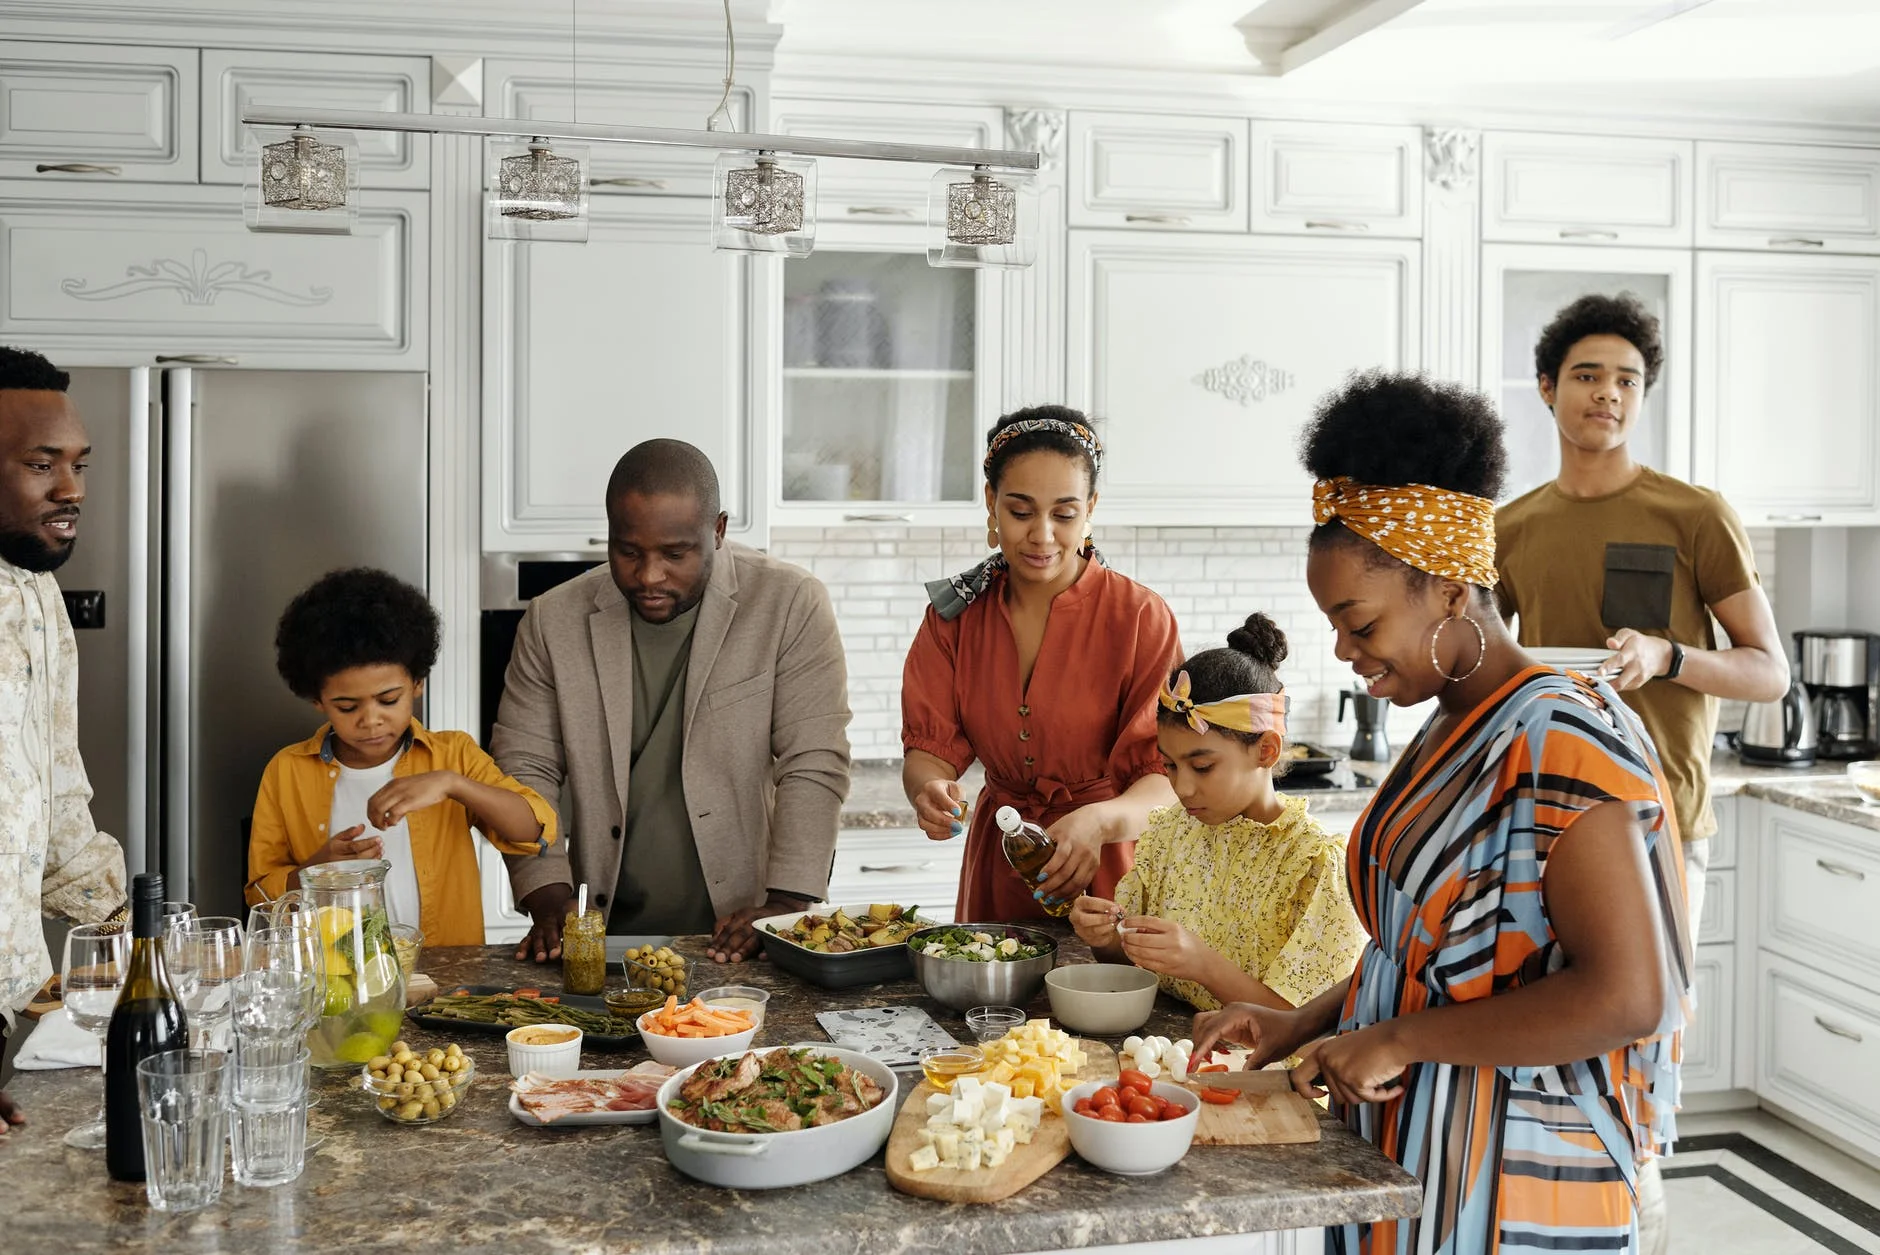 image of a family preparing a meal